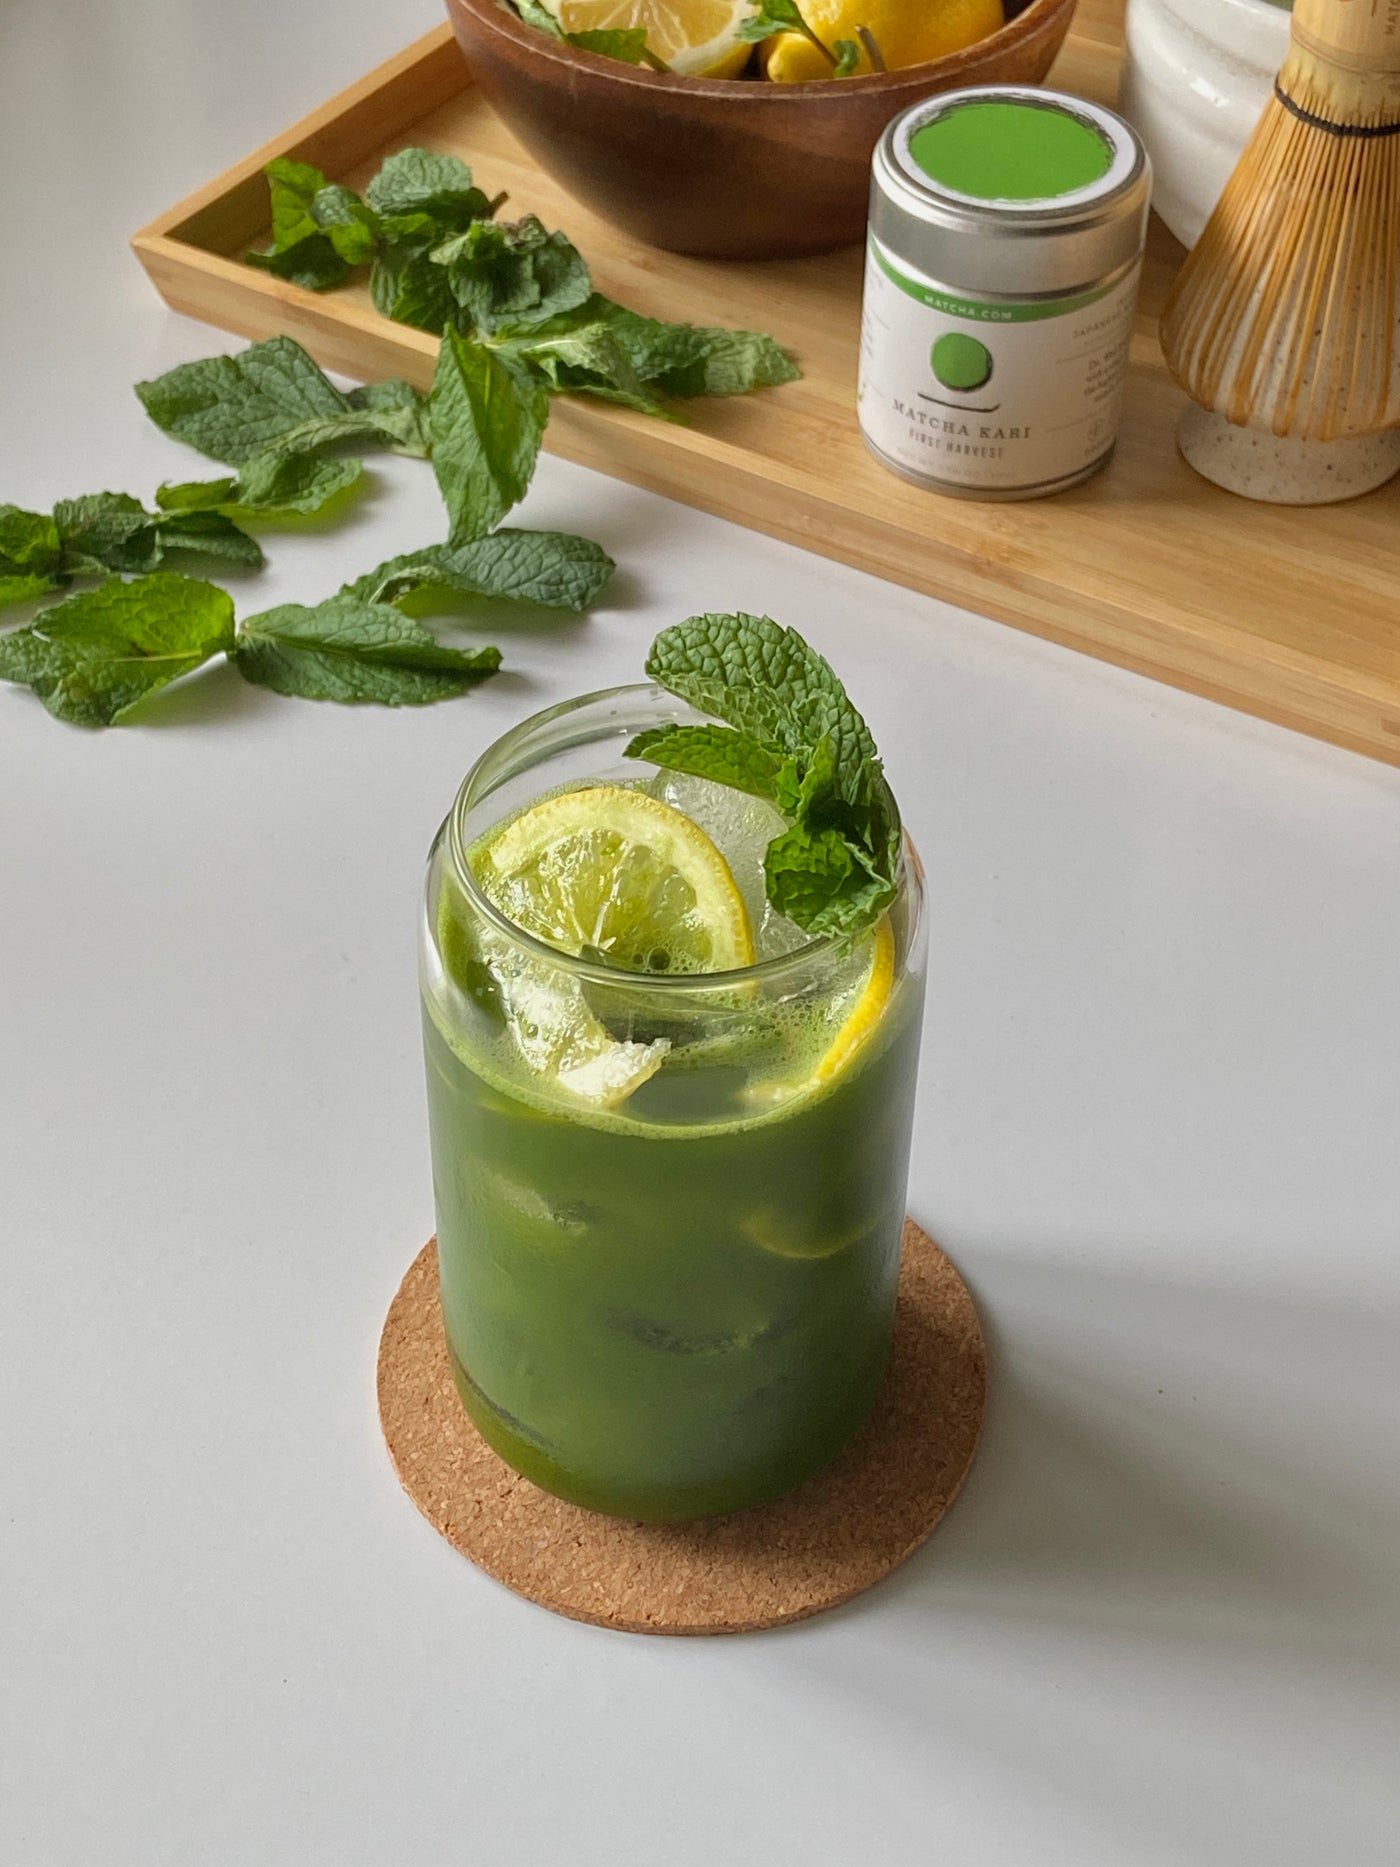 Not only is this matcha mint lemonade drink delicious and cooling, but it is also a healthier alternative to sugary summer drinks. 